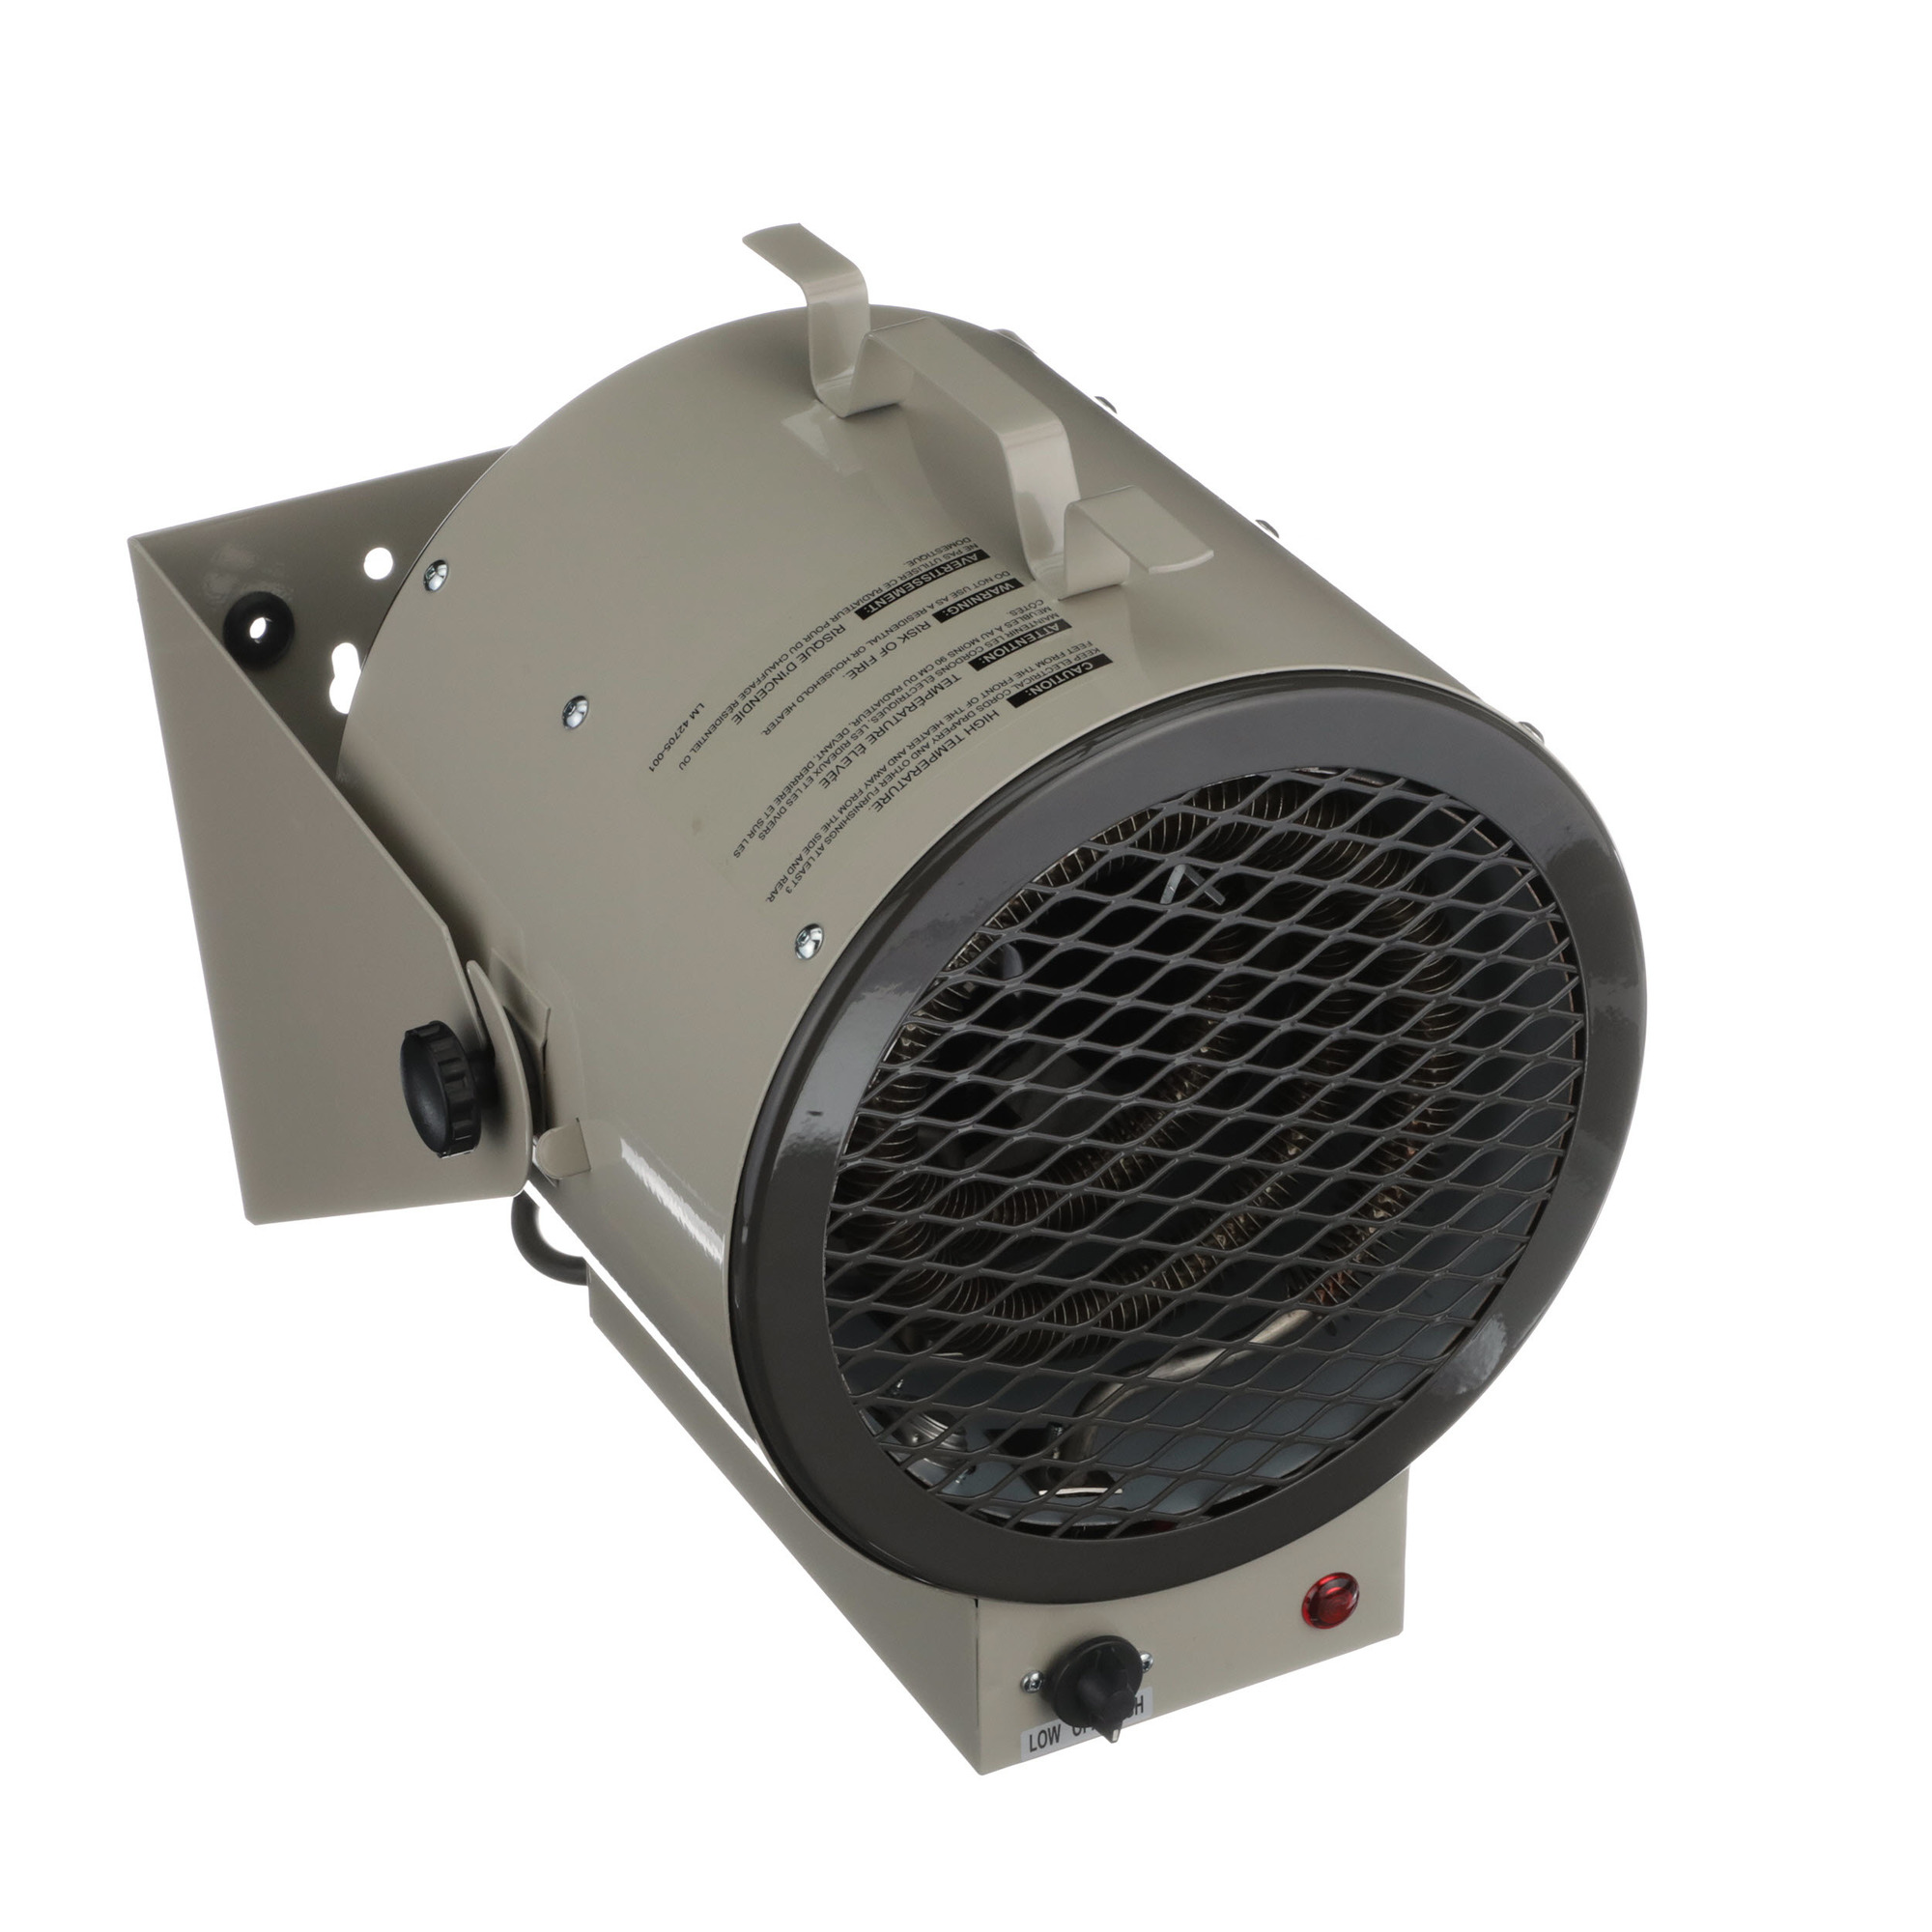 "TPI, 680 Series ""Bulldog"" Fan Forced Portable Heater, Fuel Type Electric, Heat Output 16384 Btu/hour, Heat Type Forced Air, Model HF685TC"